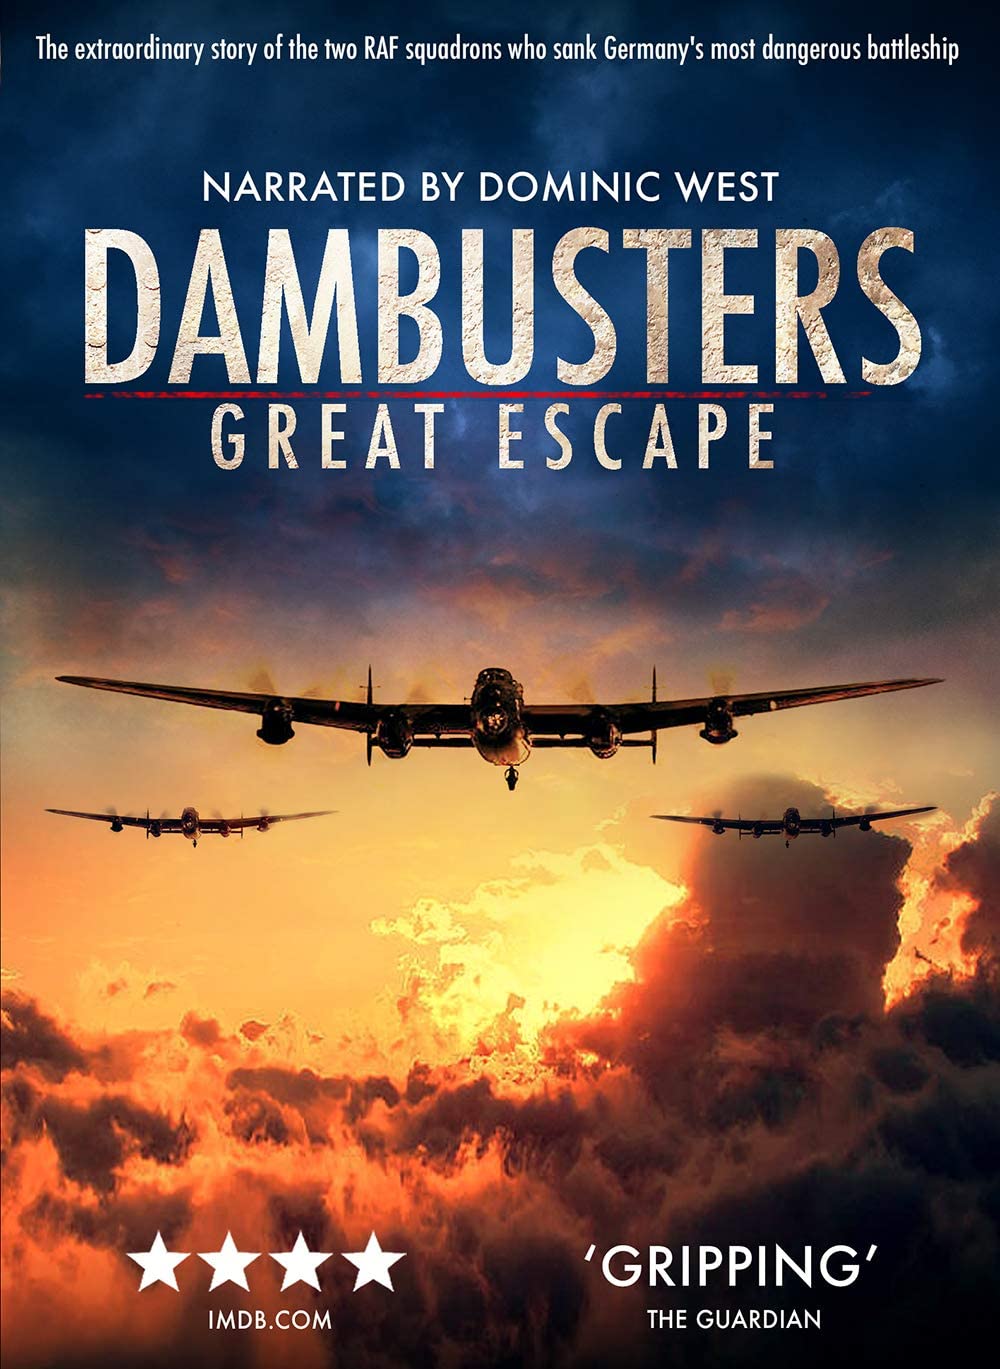 Dambusters Great Escape – Narrated by Dominic West - Documentary [DVD]